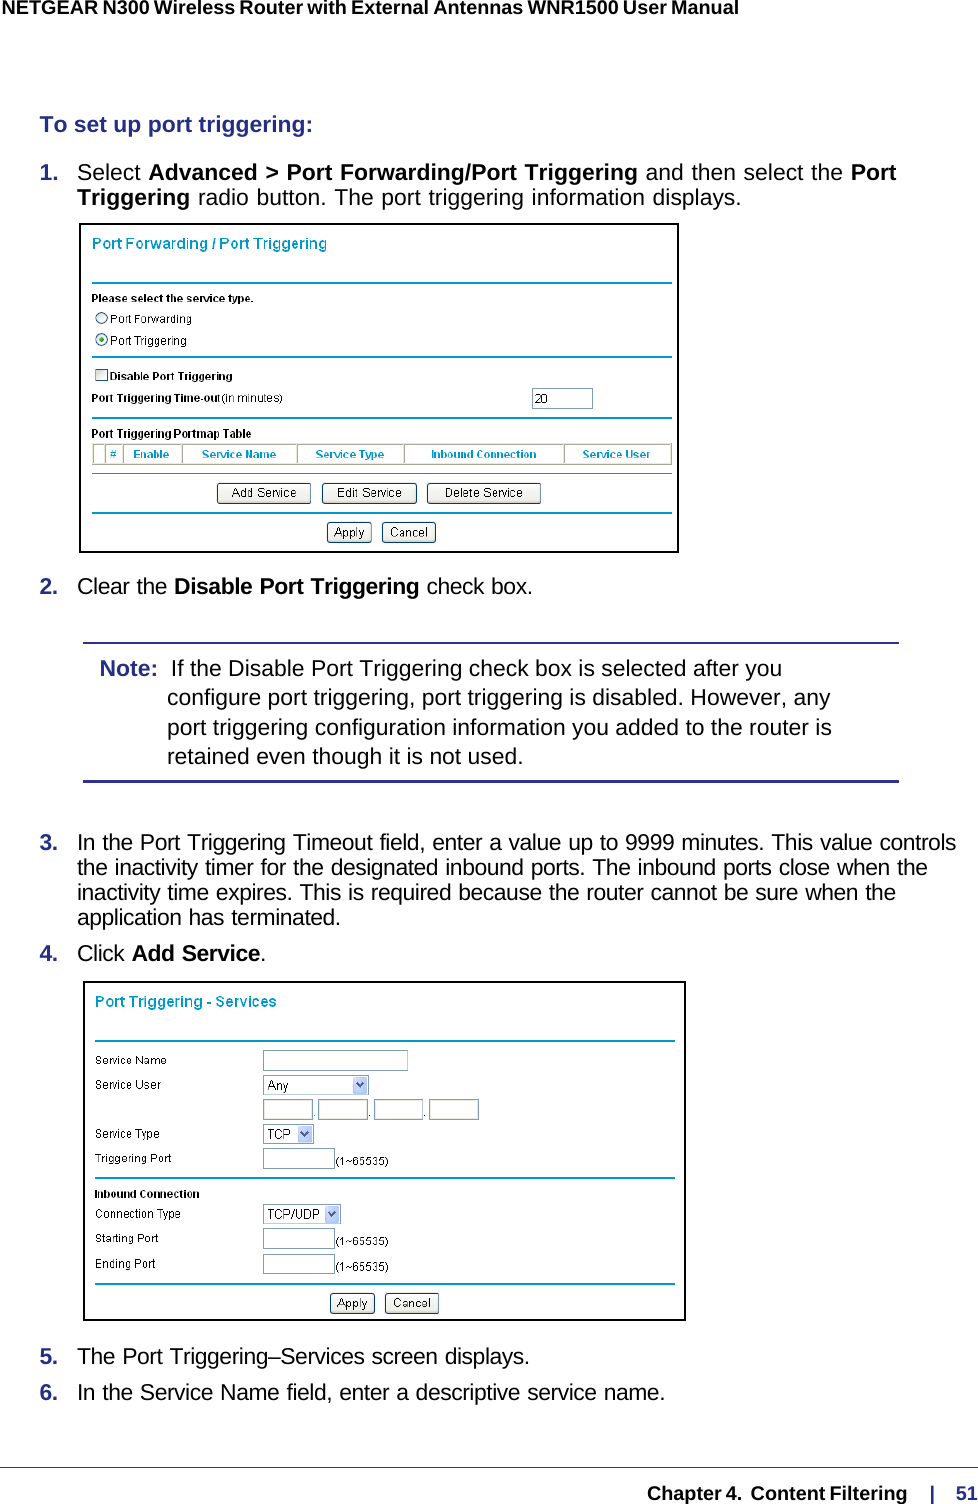   Chapter 4.  Content Filtering     |    51NETGEAR N300 Wireless Router with External Antennas WNR1500 User Manual To set up port triggering: 1.  Select Advanced &gt; Port Forwarding/Port Triggering and then select the Port Triggering radio button. The port triggering information displays.2.  Clear the Disable Port Triggering check box.Note:  If the Disable Port Triggering check box is selected after you configure port triggering, port triggering is disabled. However, any port triggering configuration information you added to the router is retained even though it is not used.3.  In the Port Triggering Timeout field, enter a value up to 9999 minutes. This value controls the inactivity timer for the designated inbound ports. The inbound ports close when the inactivity time expires. This is required because the router cannot be sure when the application has terminated.4.  Click Add Service. 5.  The Port Triggering–Services screen displays.6.  In the Service Name field, enter a descriptive service name. 